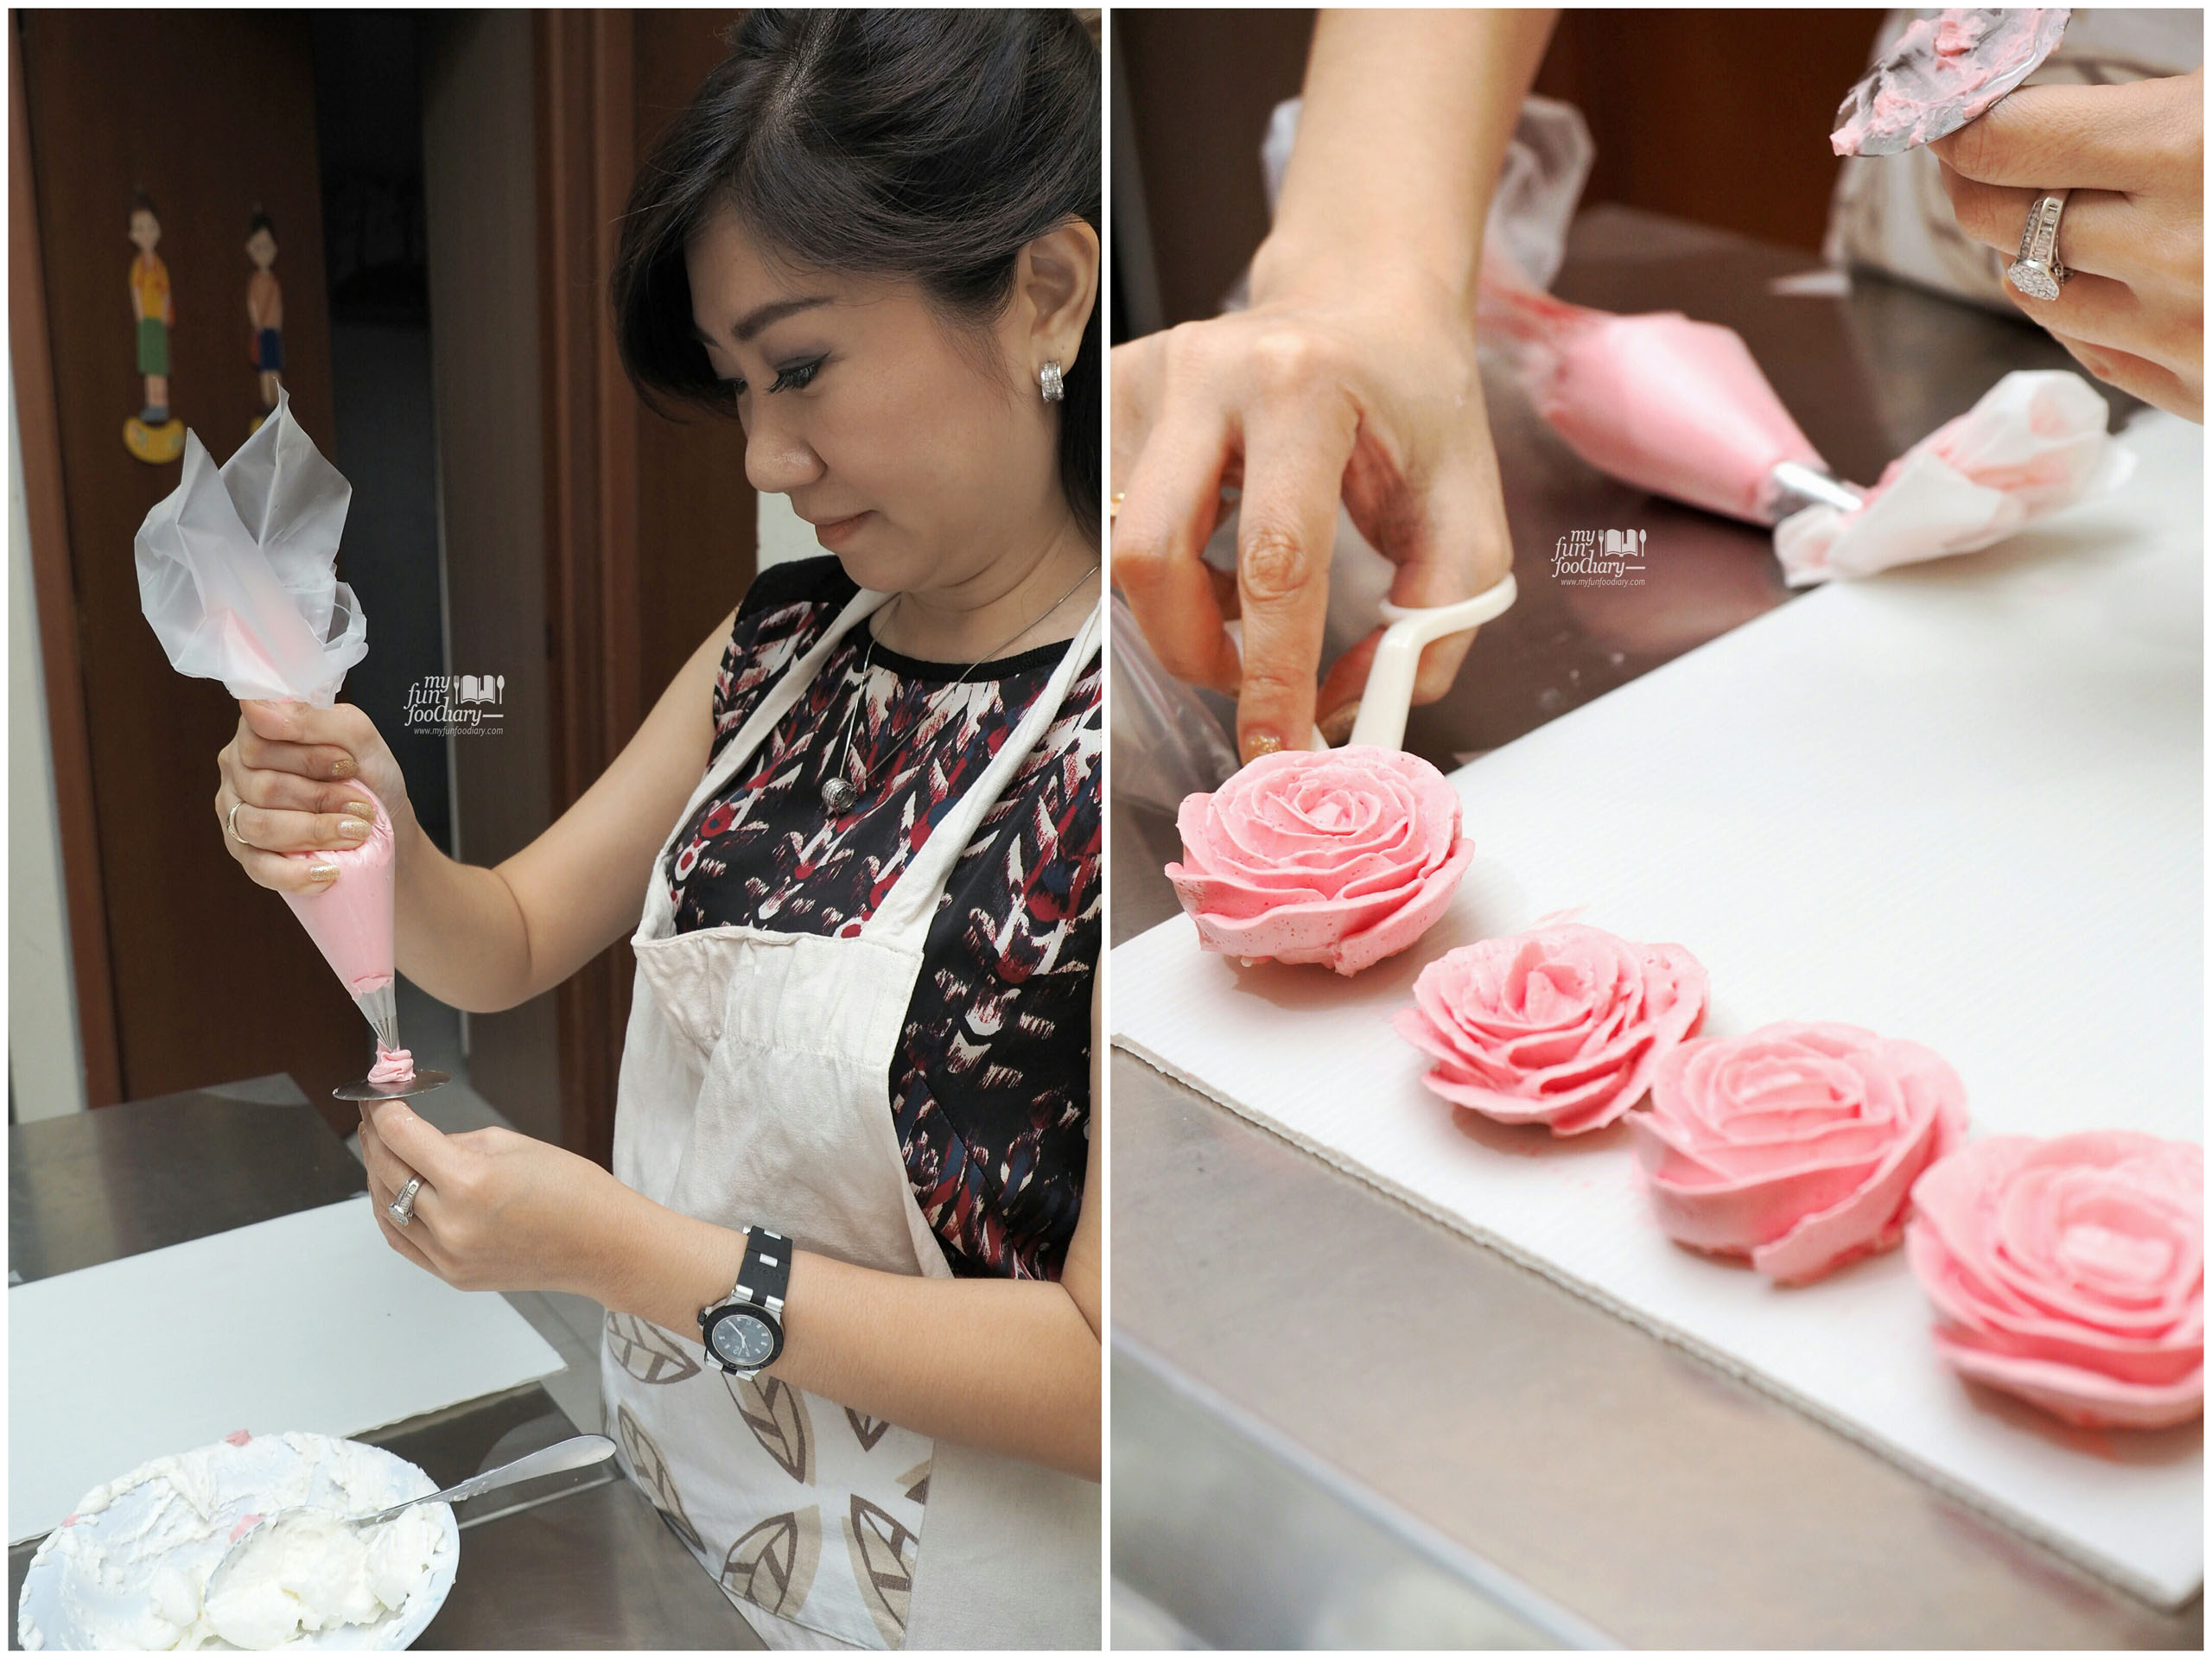 Nina and her roses at Spatula Baking Course by Myfunfoodiary